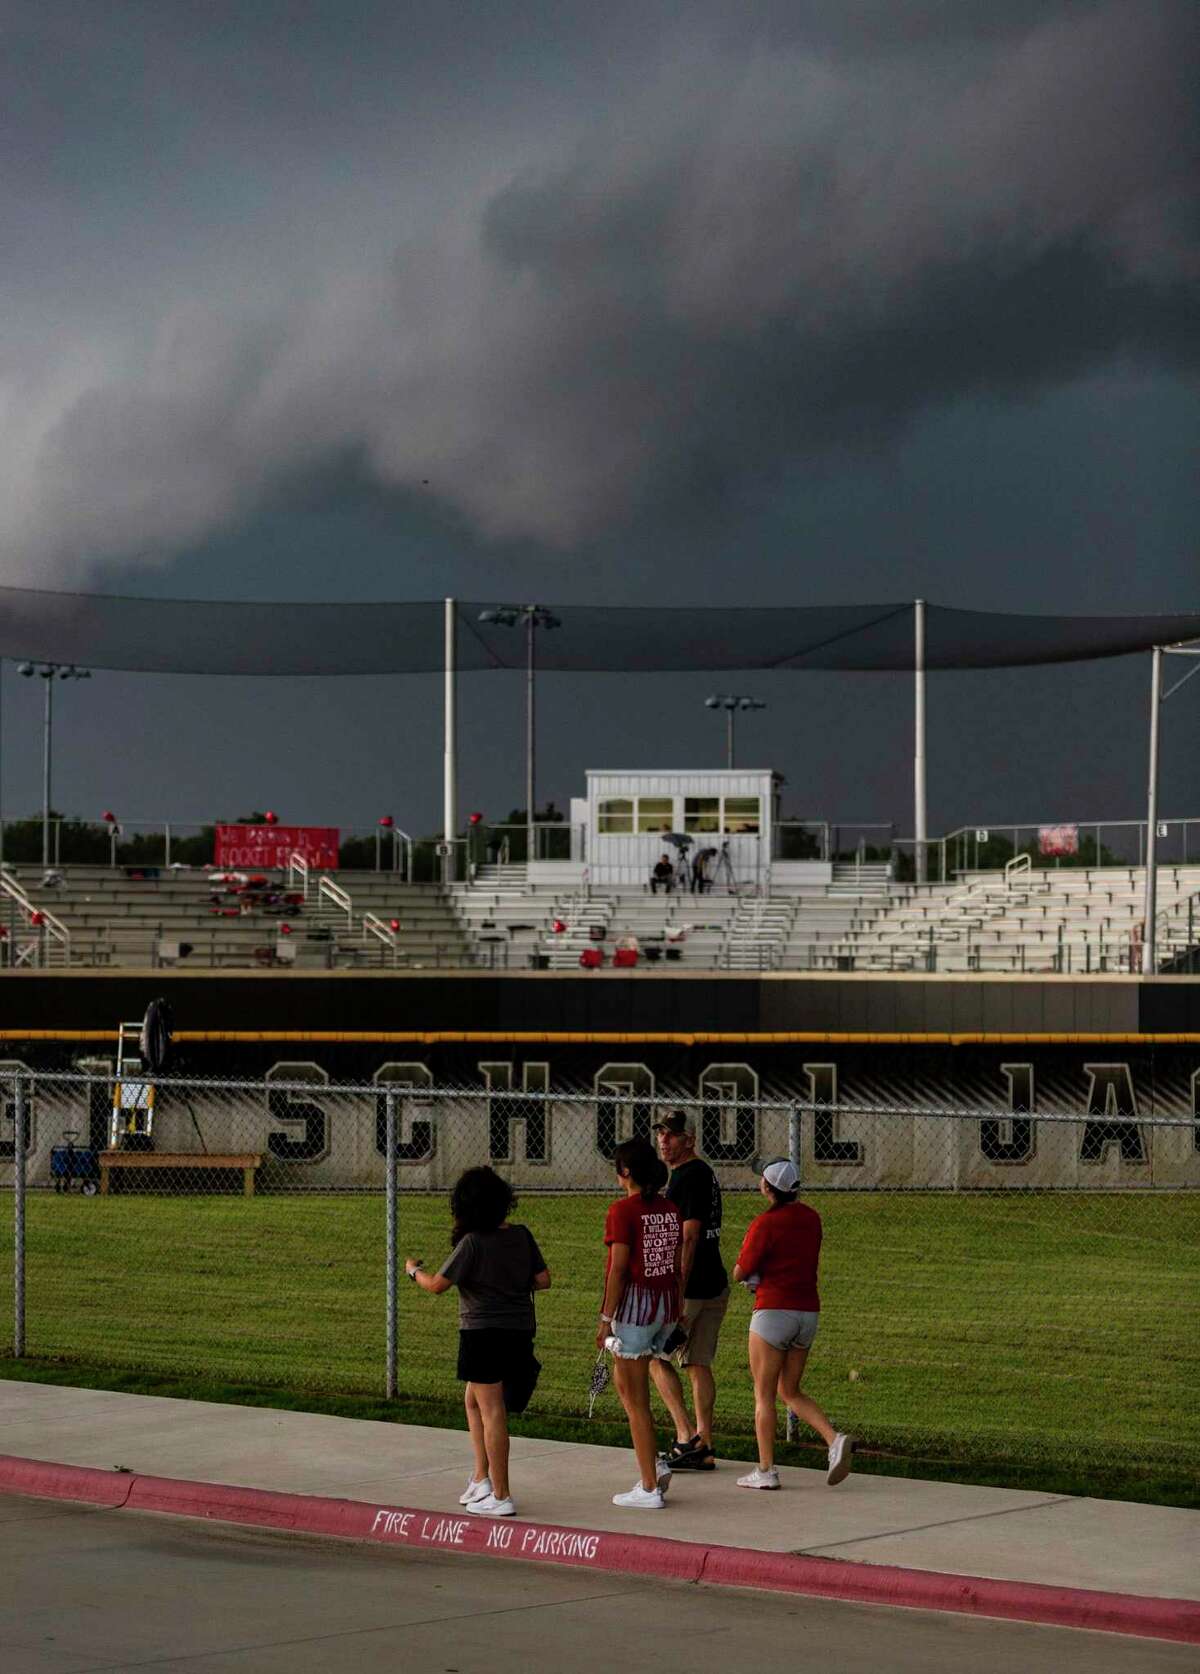 Fans leave the stadium Friday, May 28, 2021 at Johnson High School in Buda as storm clouds and lighting cause a game delay during Judson's Class 6A state quarterfinal softball game against Austin Bowie.